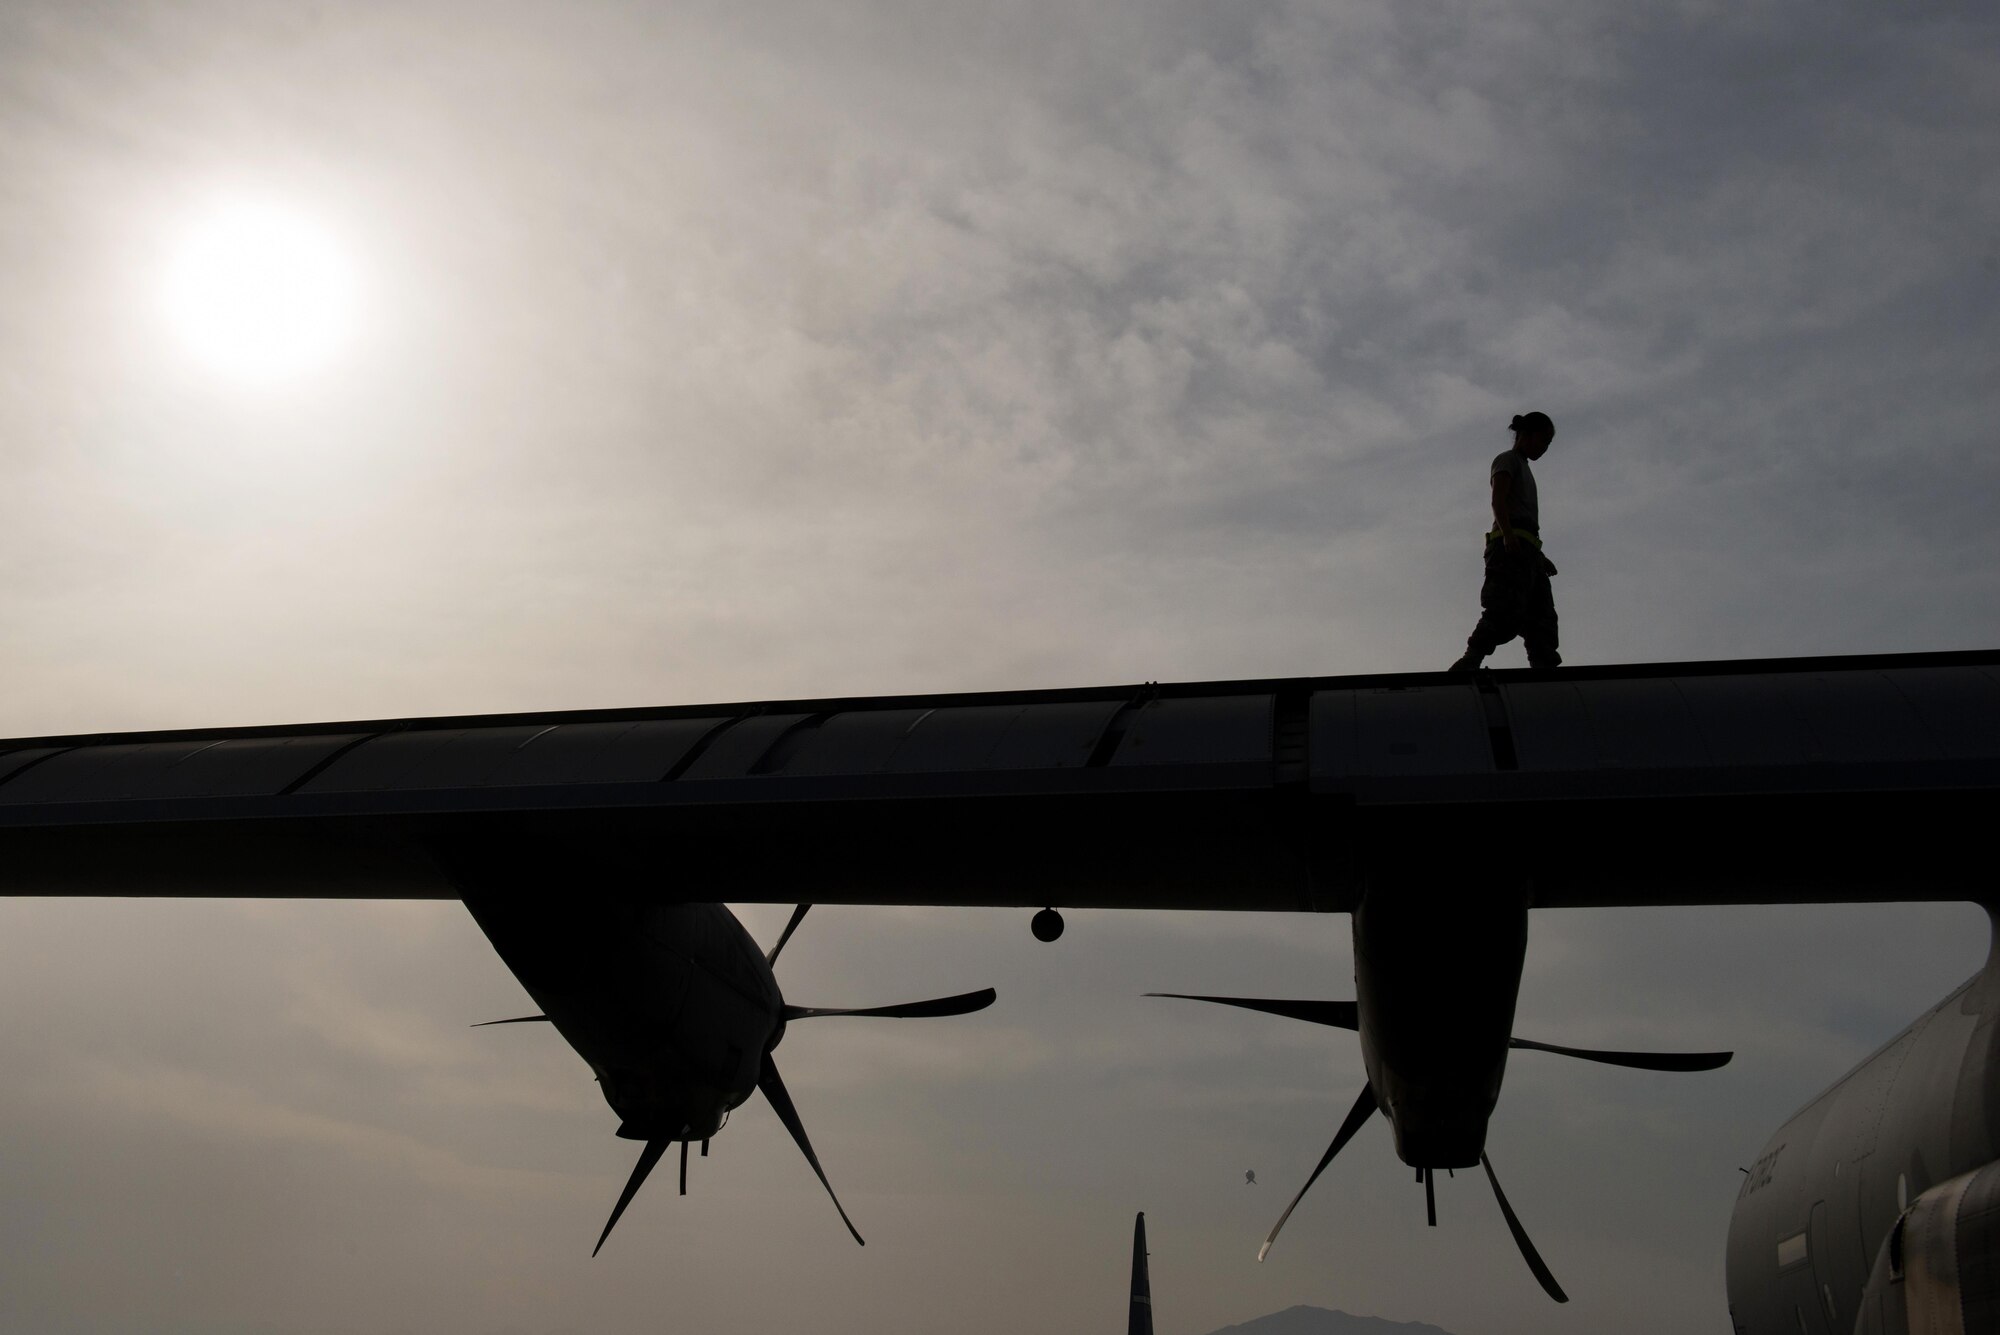 U.S. Air Force Senior Airman Mina Phouangphidok, assigned to the 455th Expeditionary Aircraft Maintenance Squadron, checks the wings on a C-130J Super Hercules aircraft during a post flight inspection on the flight line at Bagram Airfield, Afghanistan, May 5, 2015.  The 455th EAMXS ensure Super Hercules on Bagram are prepared for flight and return them to a mission-ready state once they land. (U.S. Air Force photo by Tech. Sgt. Joseph Swafford/Released)